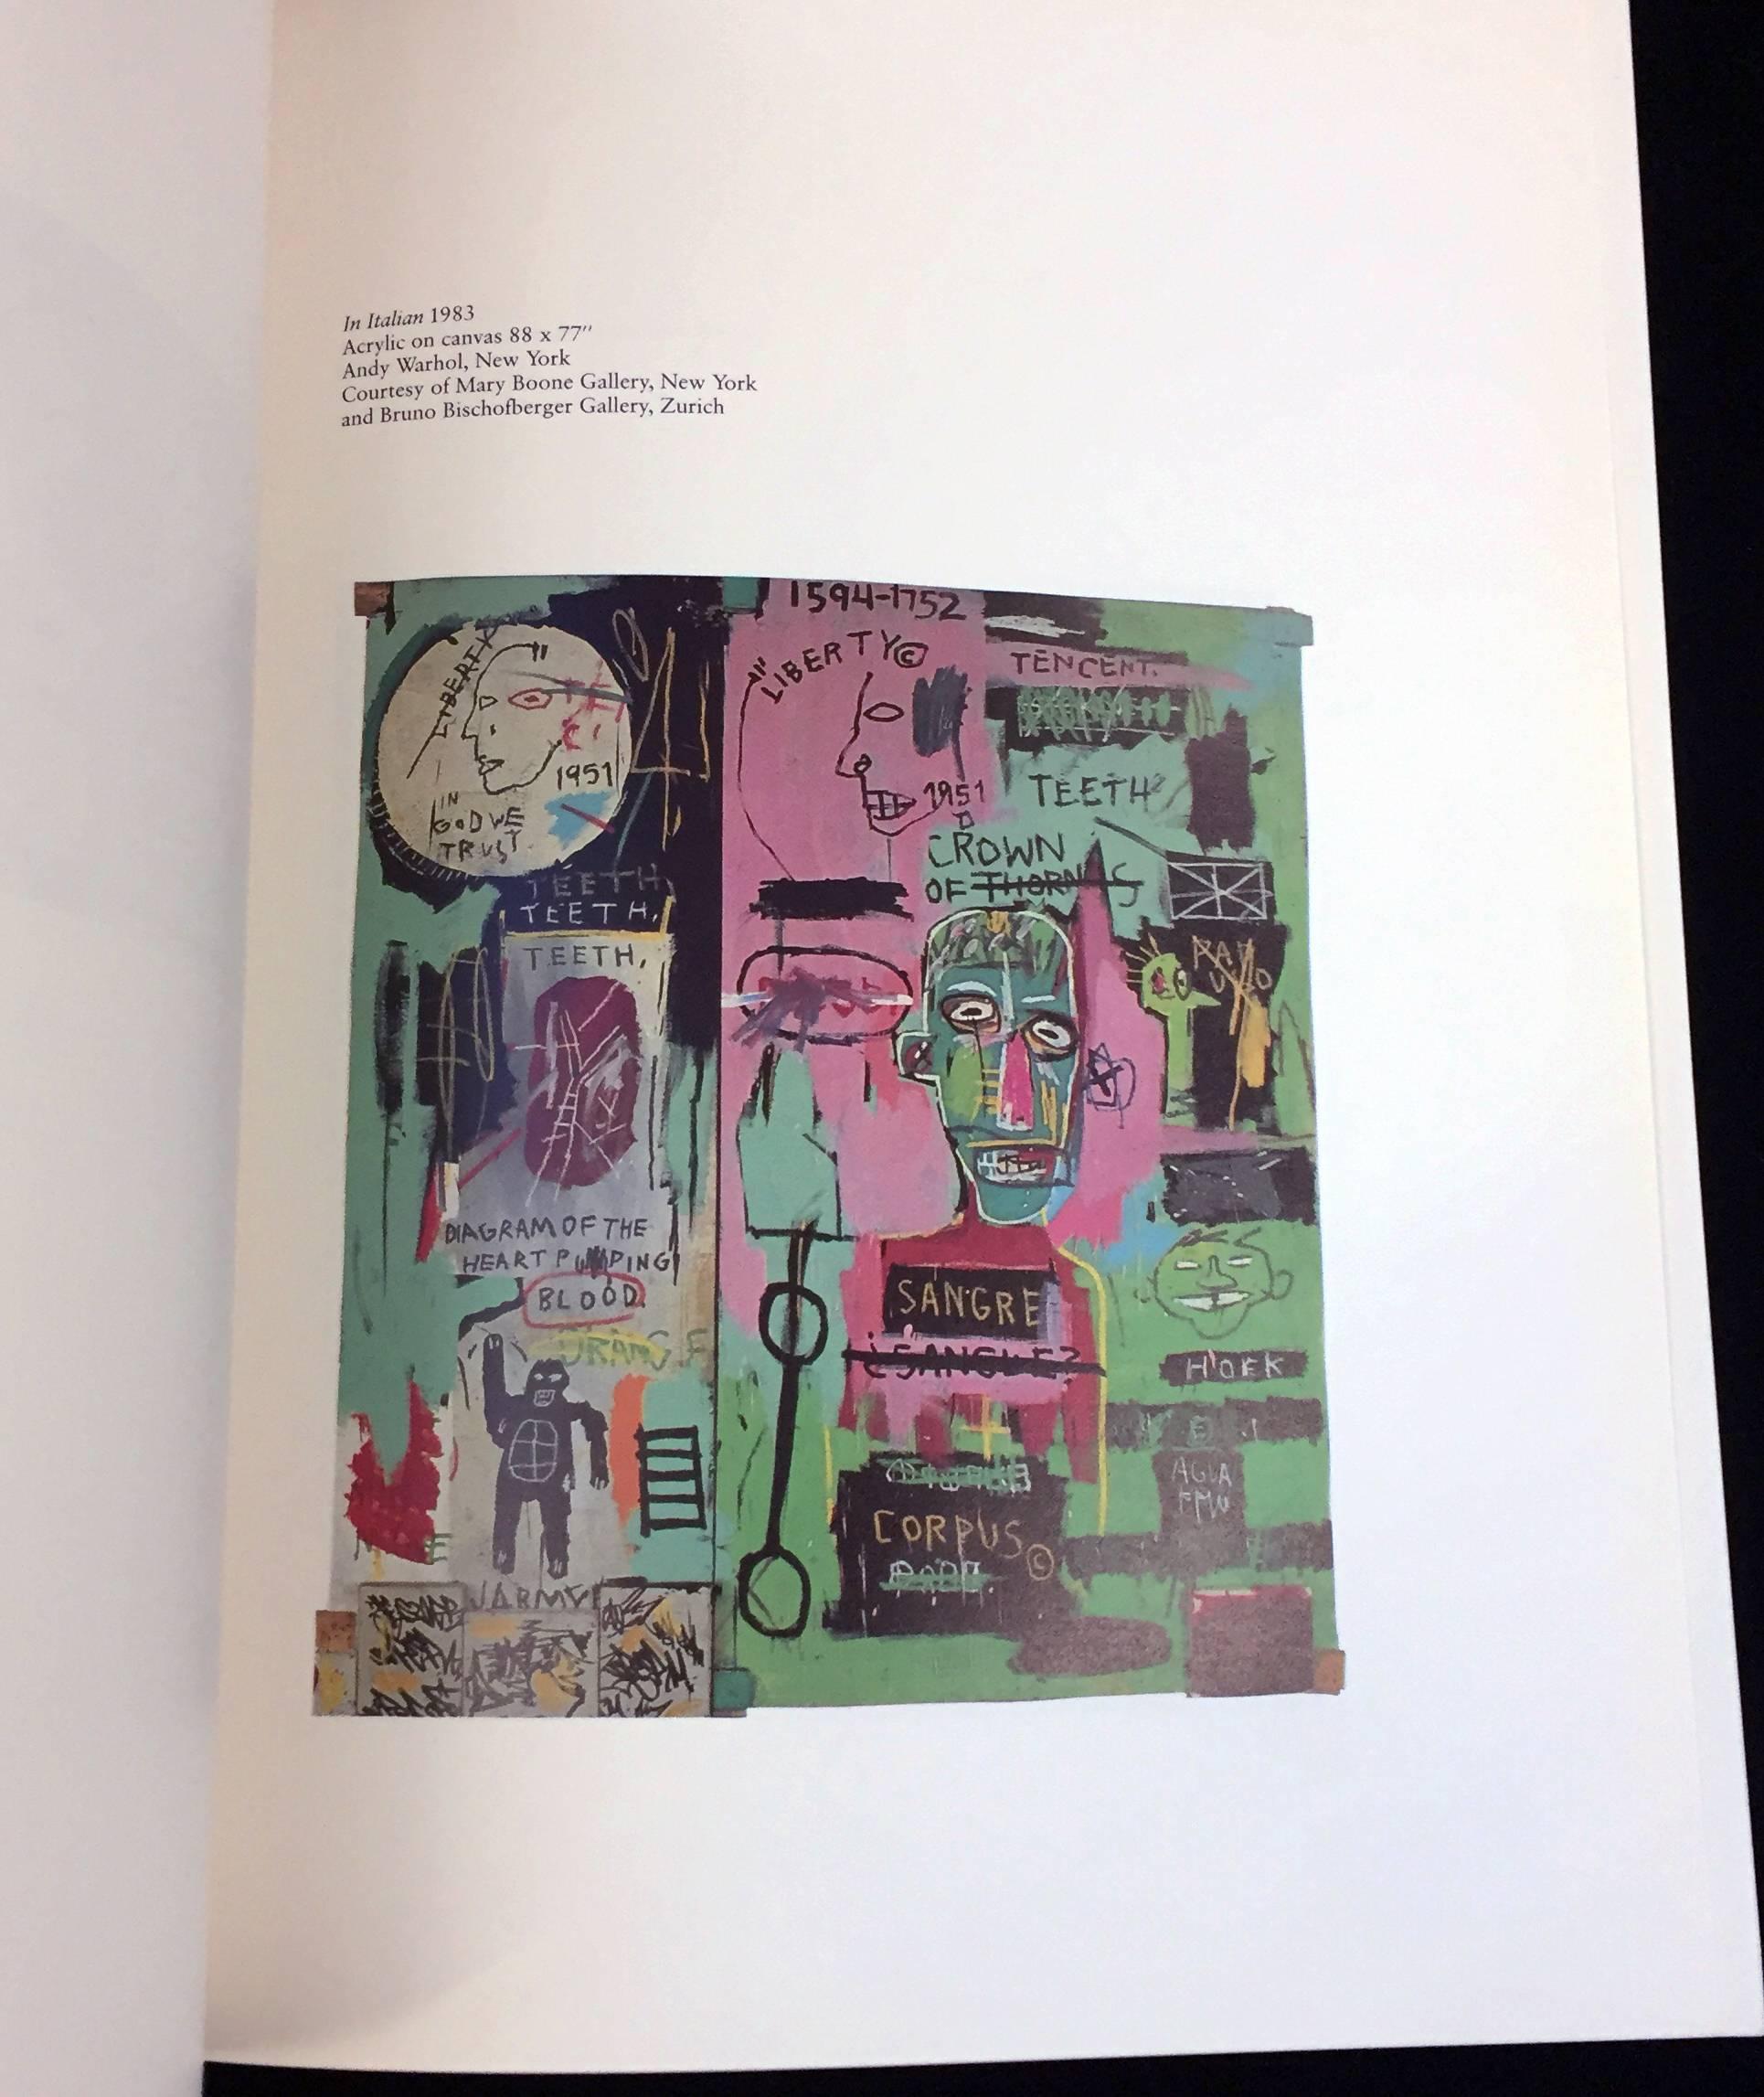 Jean-Michel Basquiat Paintings 1981-1984
Rare catalogue from 1984, published by The Fruitmarket Gallery in Edinburgh, Scotland, marking the artist’s first museum exhibition: 